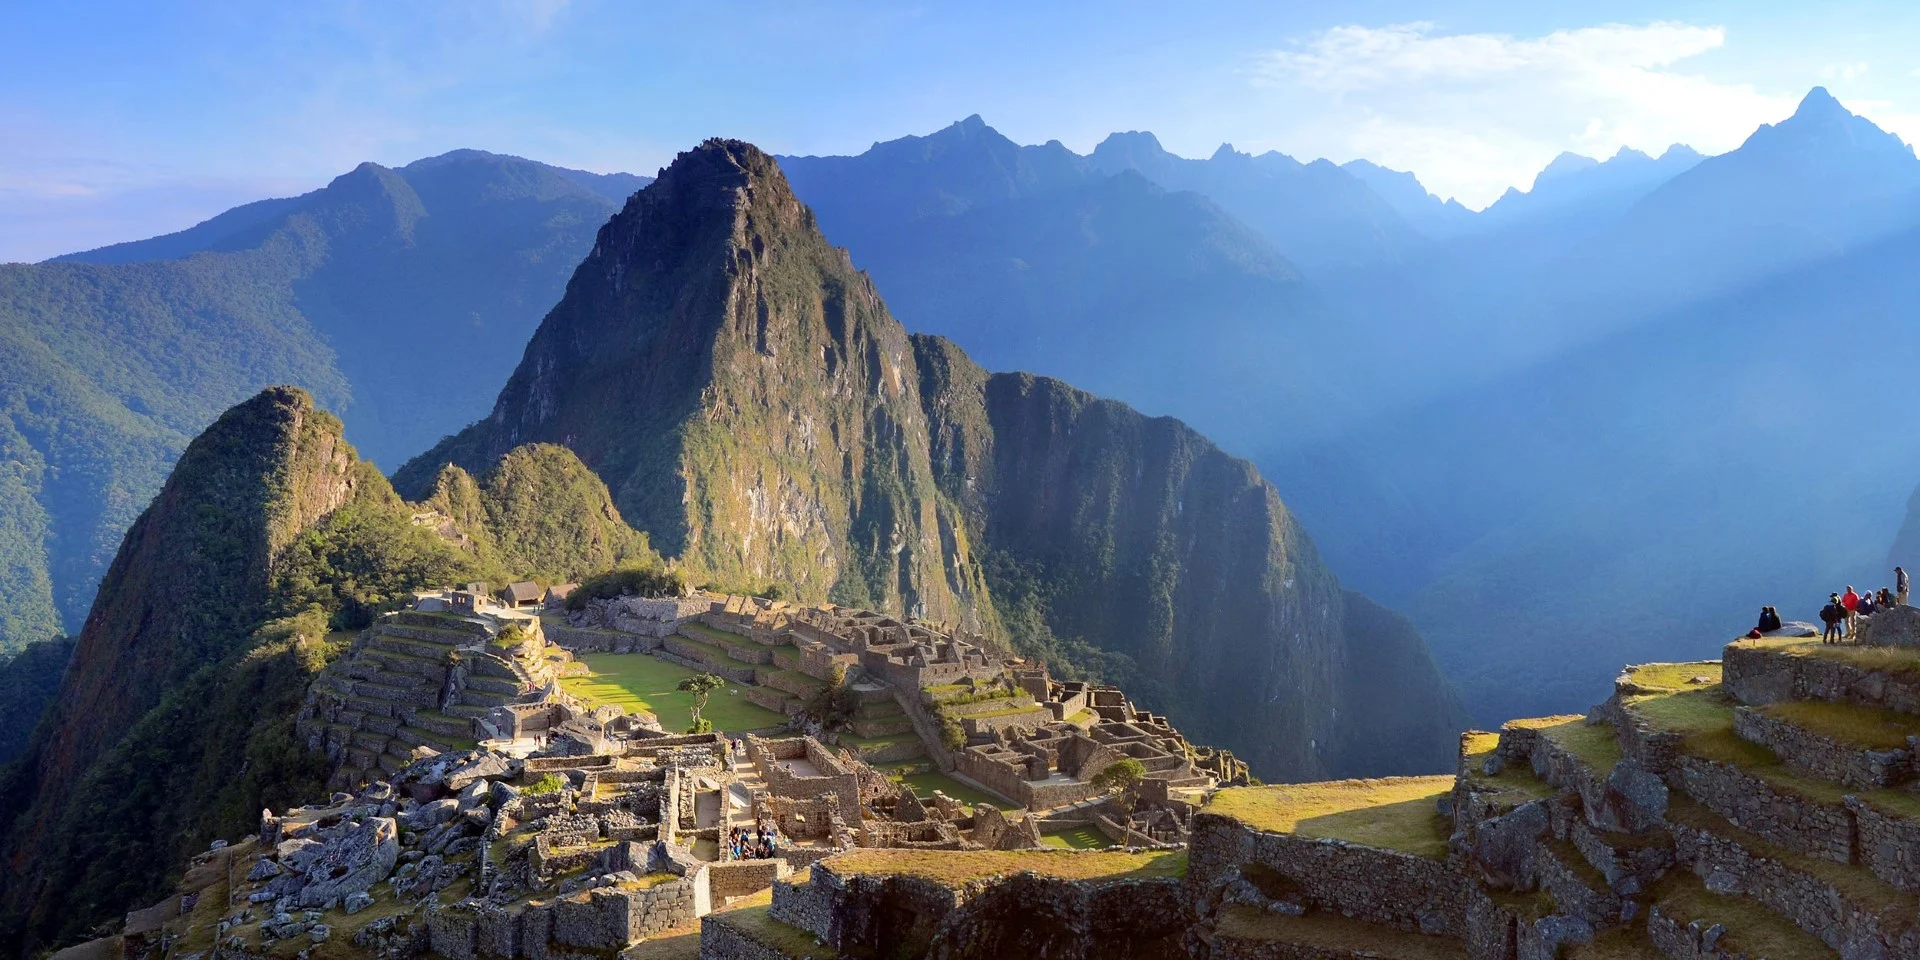 Different Ways to See Machu Picchu